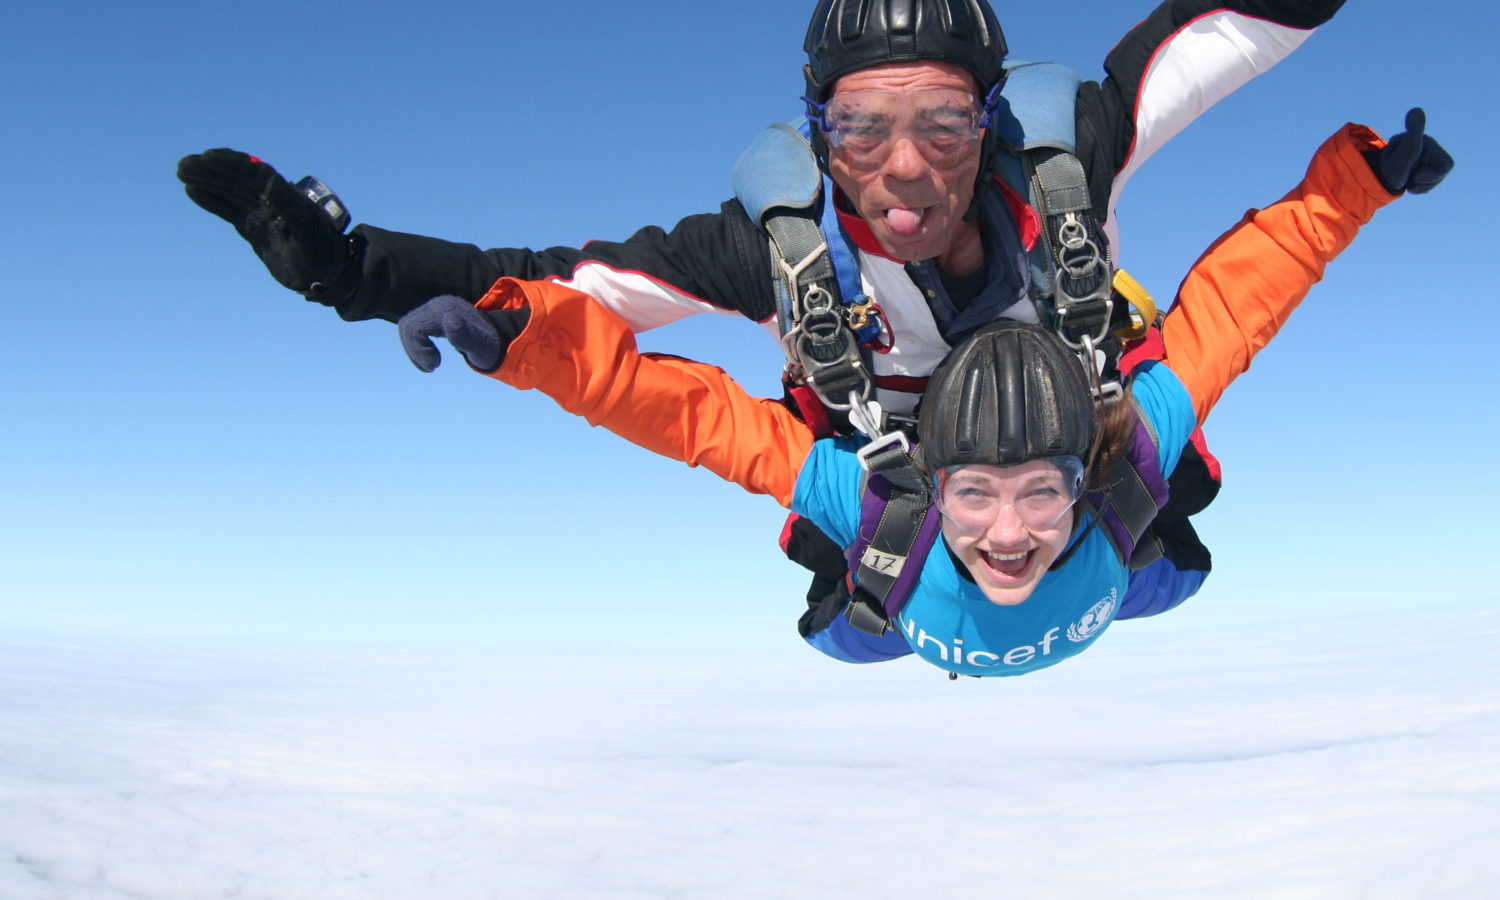 Skydive for Team Unicef